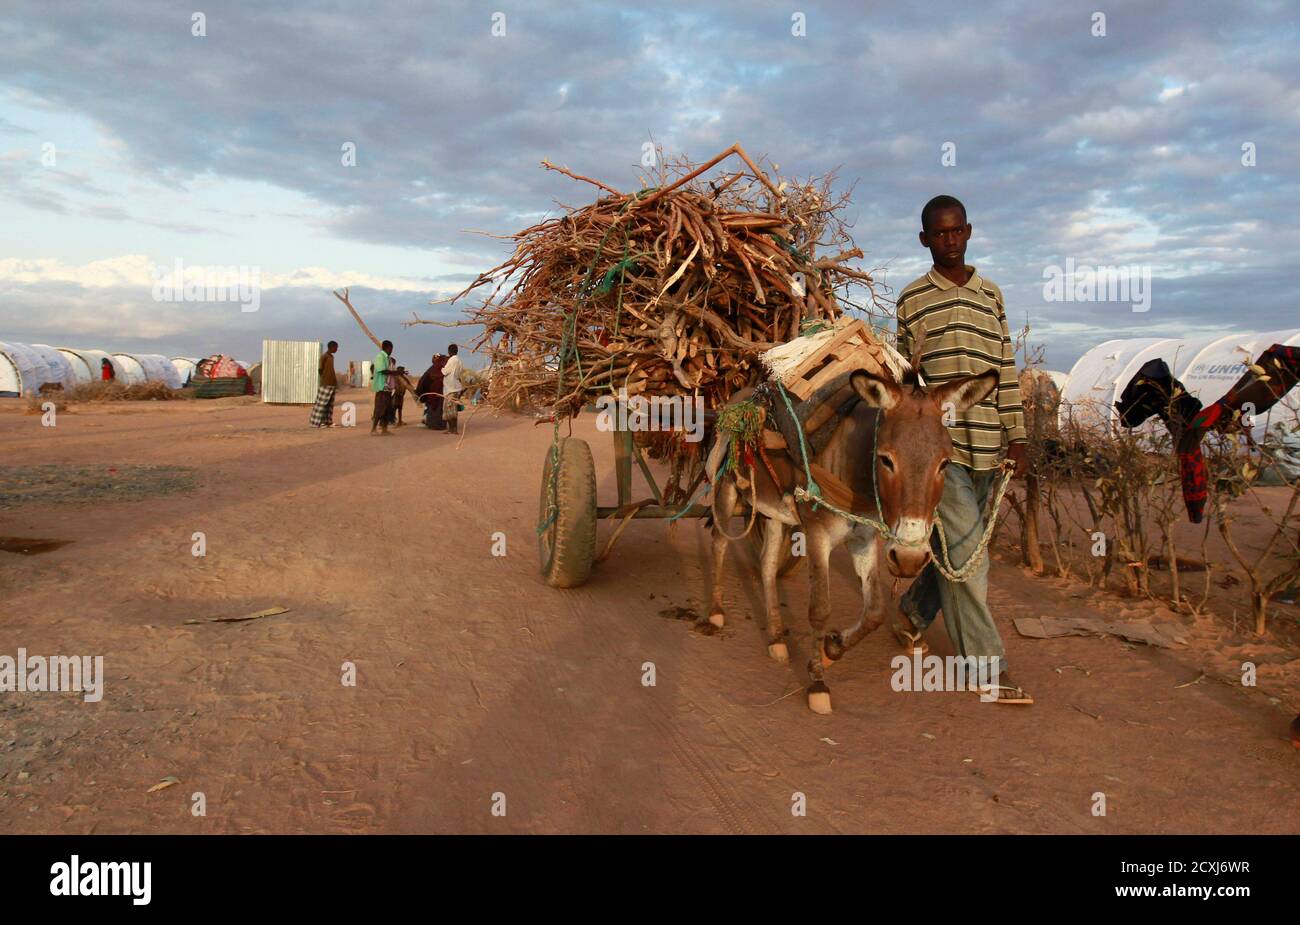 A Somali refugee drives his donkey loaded with firewood into the Ifo extension refugee camp in Dadaab, near the Kenya-Somalia border, July 31, 2011. The whole of drought- and conflict-wracked southern Somalia is heading into famine as the Horn of Africa food crisis deepens, the United Nations said. REUTERS/Thomas Mukoya (KENYA - Tags: SOCIETY CIVIL UNREST DISASTER ENVIRONMENT ANIMALS) Stock Photo